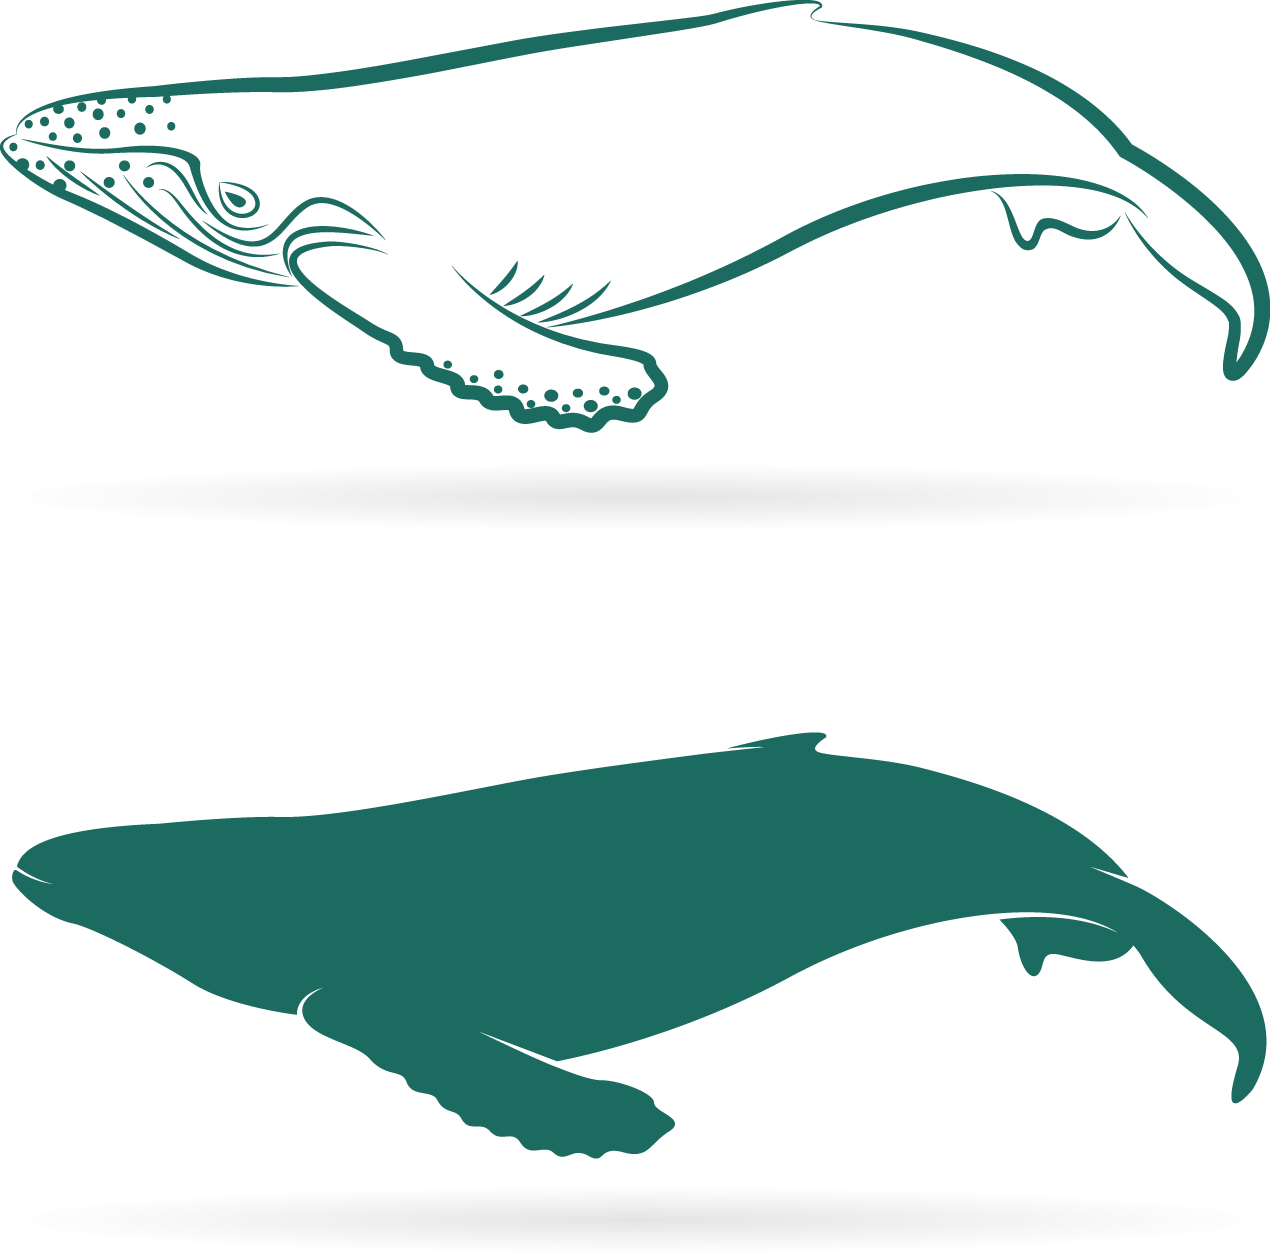 A Whale And Whale Silhouettes